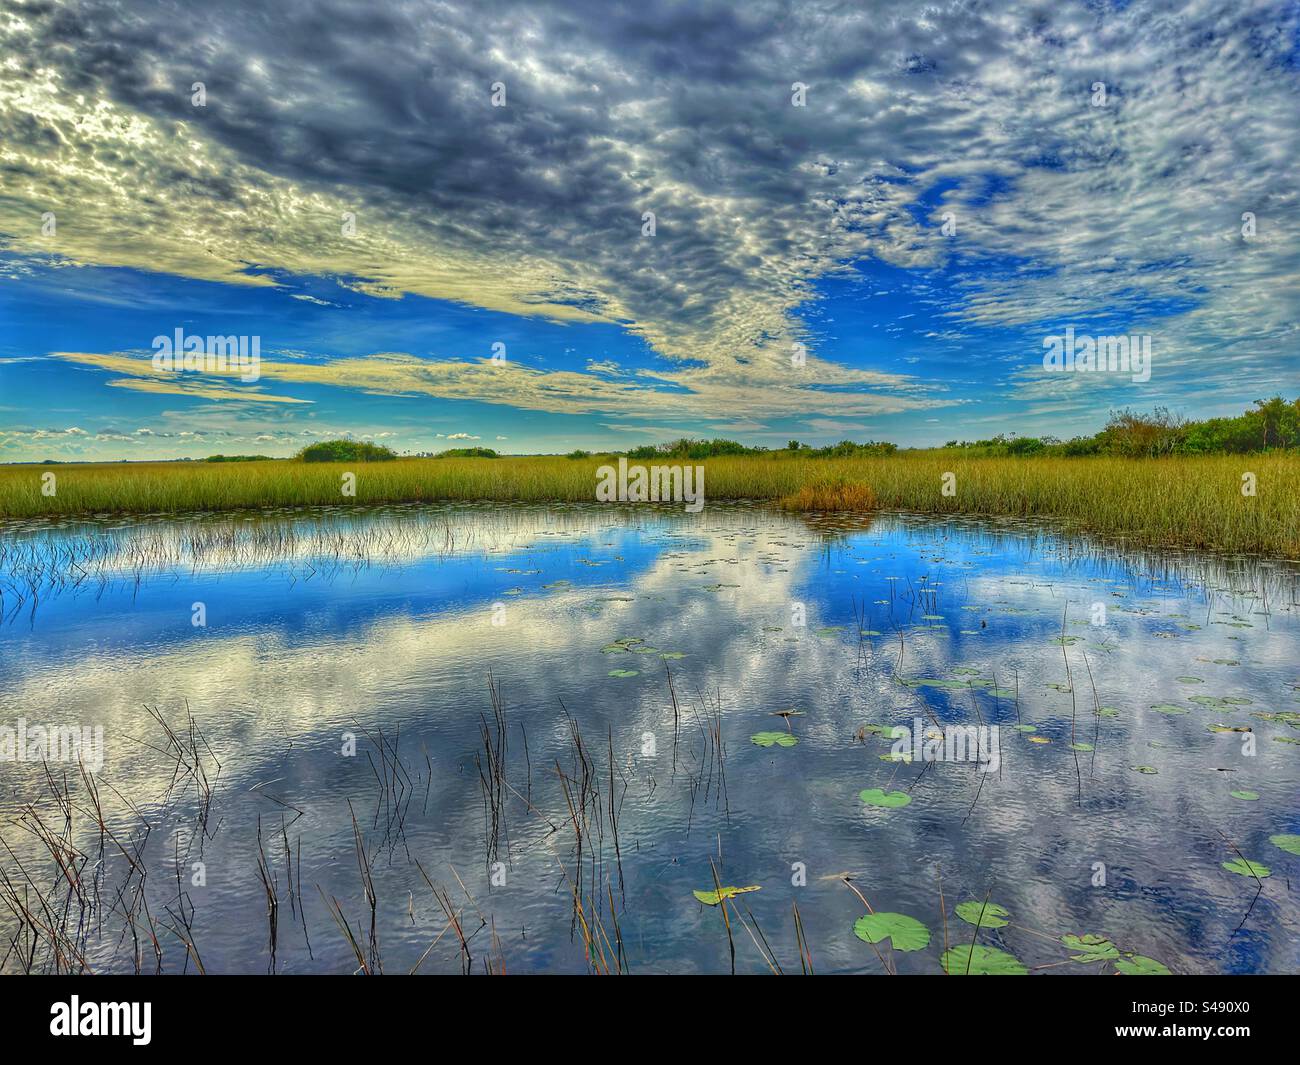 Scenic landscape view of the Everglades in Florida, USA, with cloudscape reflected in still water Stock Photo